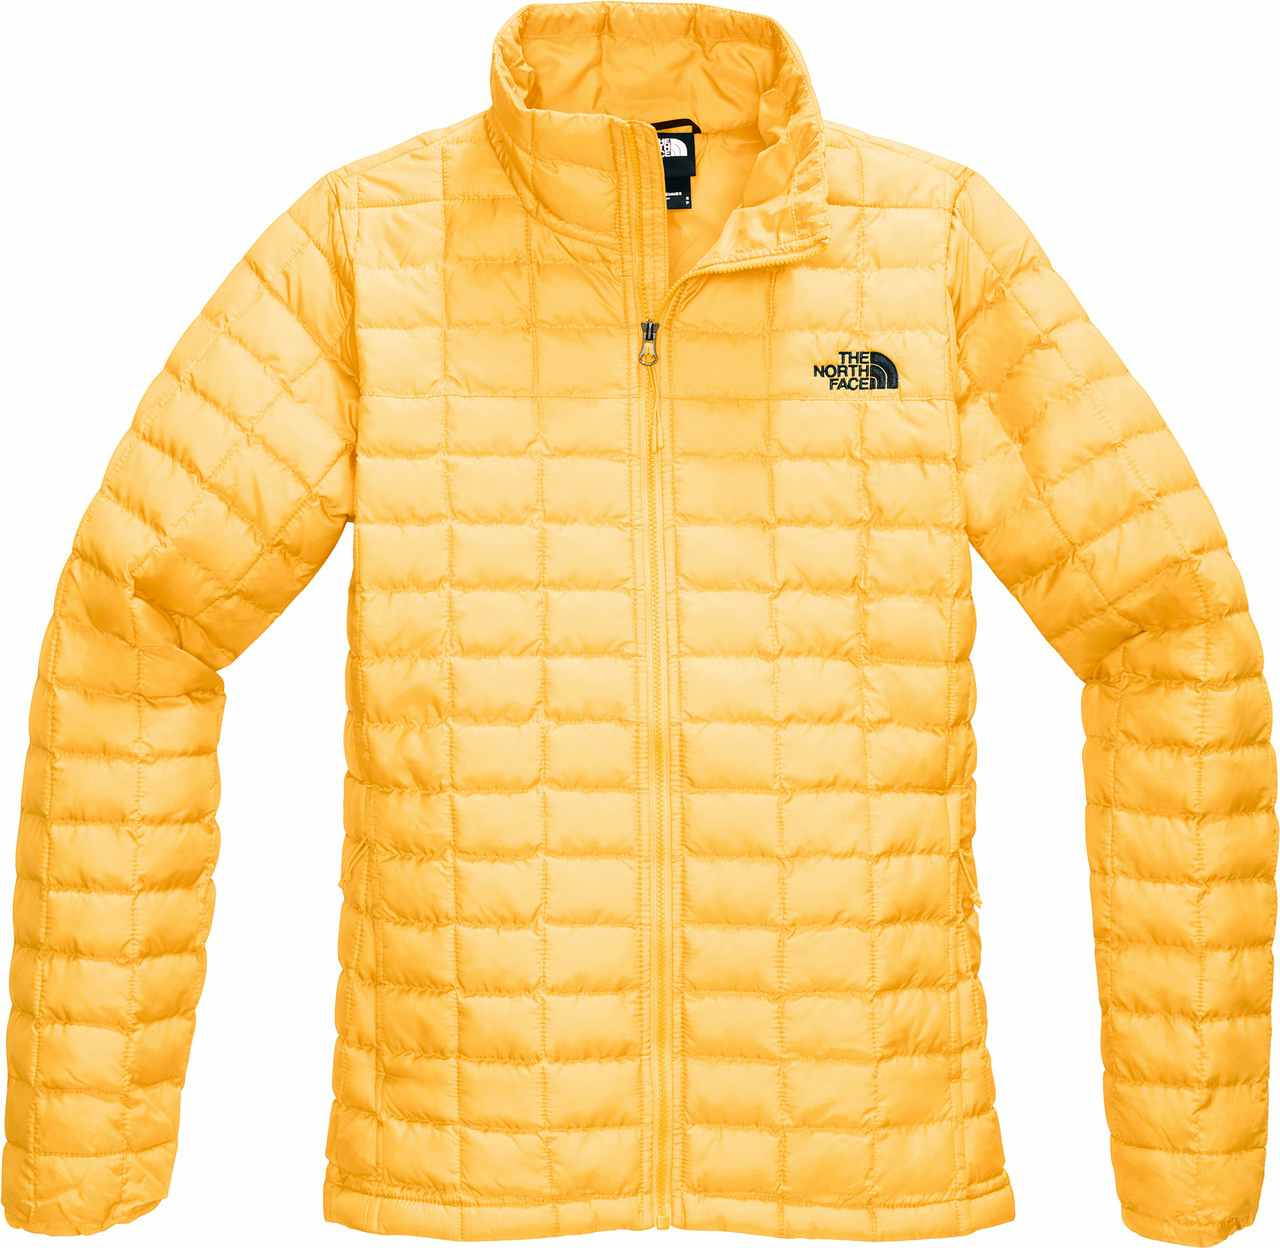 Thermoball Eco Jacket TNF Yellow Matte